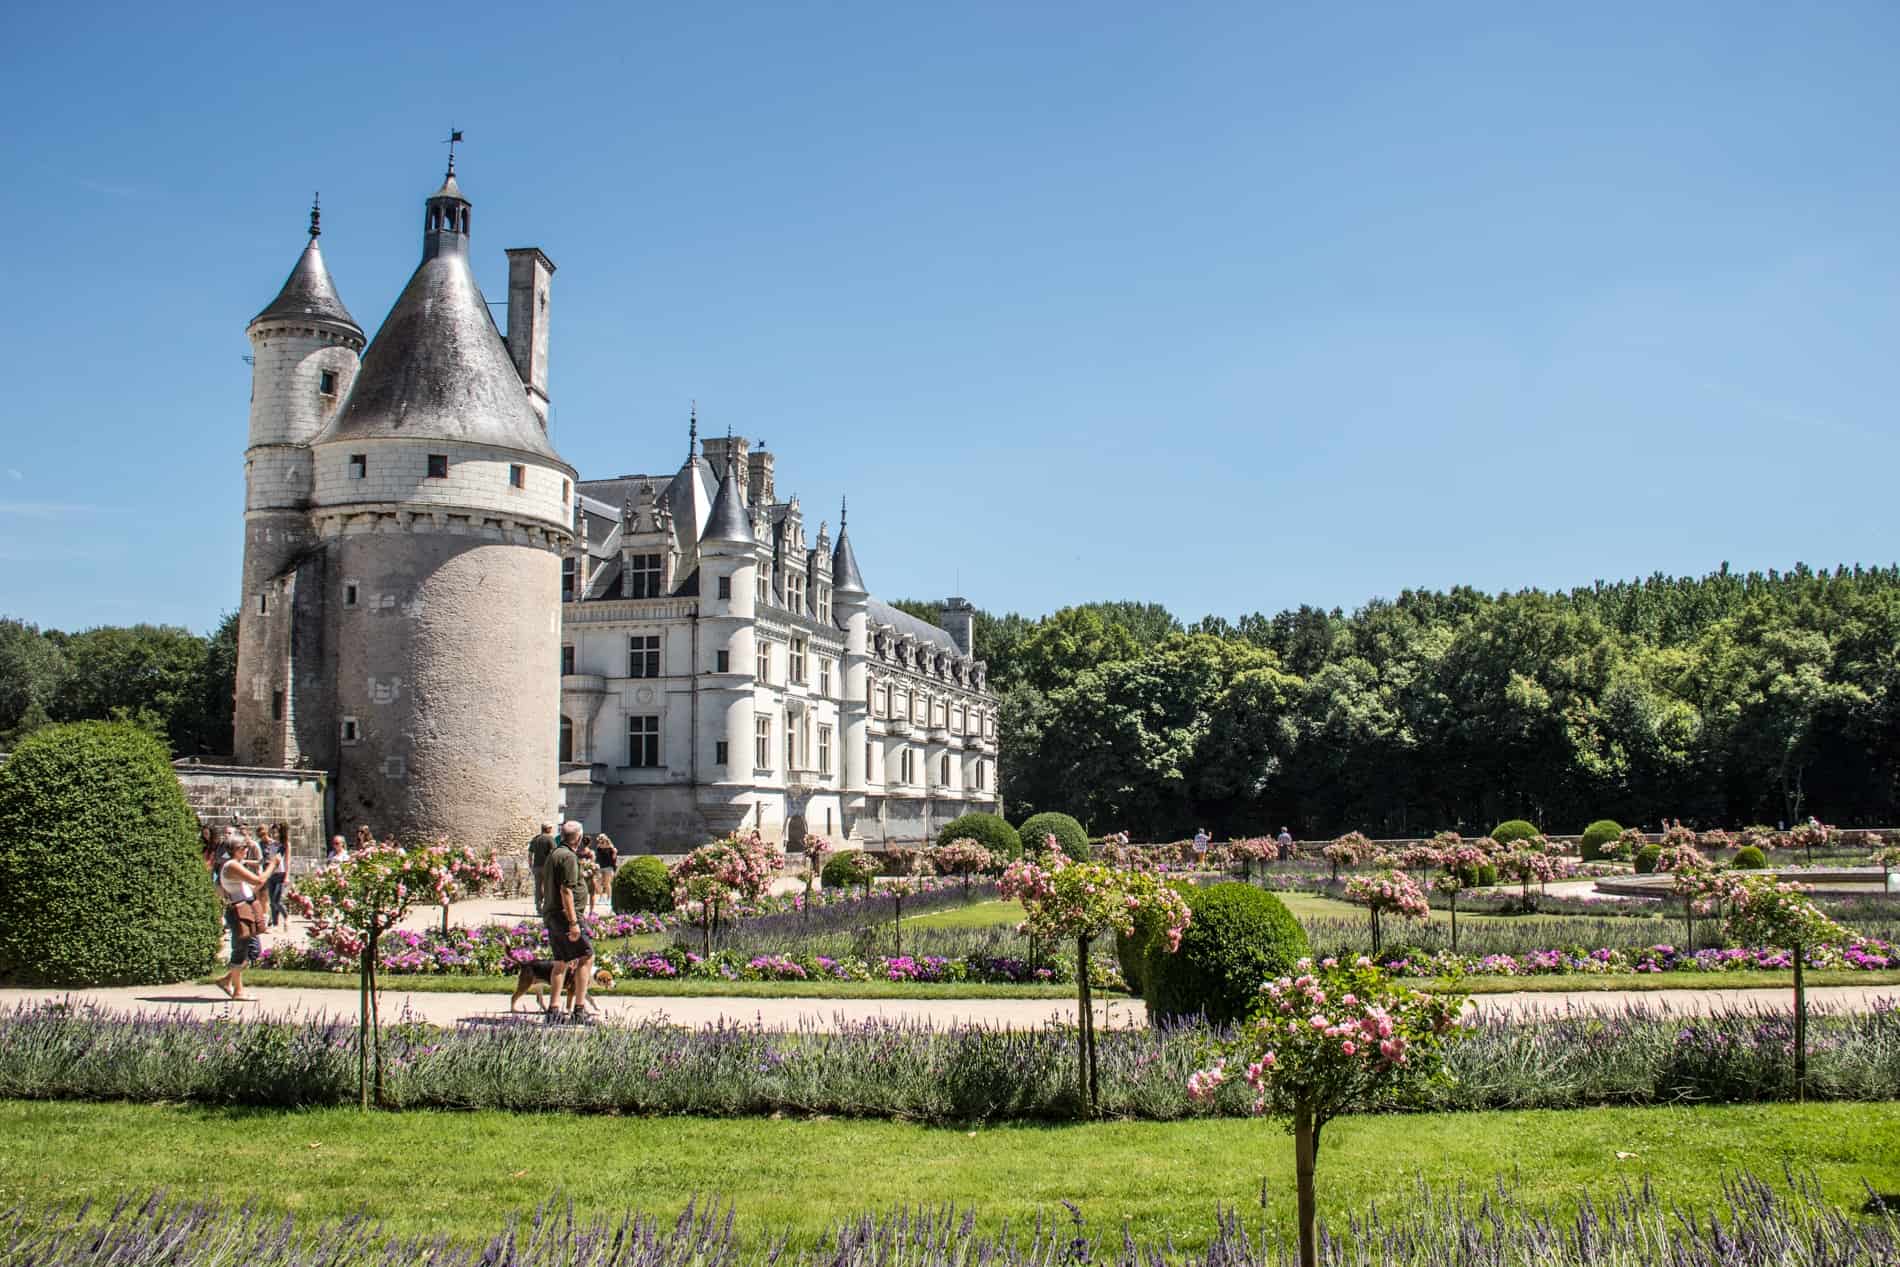 Visitors in the gardens of the silver castle-like Château de Chenonceau in the Loire Valley, France.